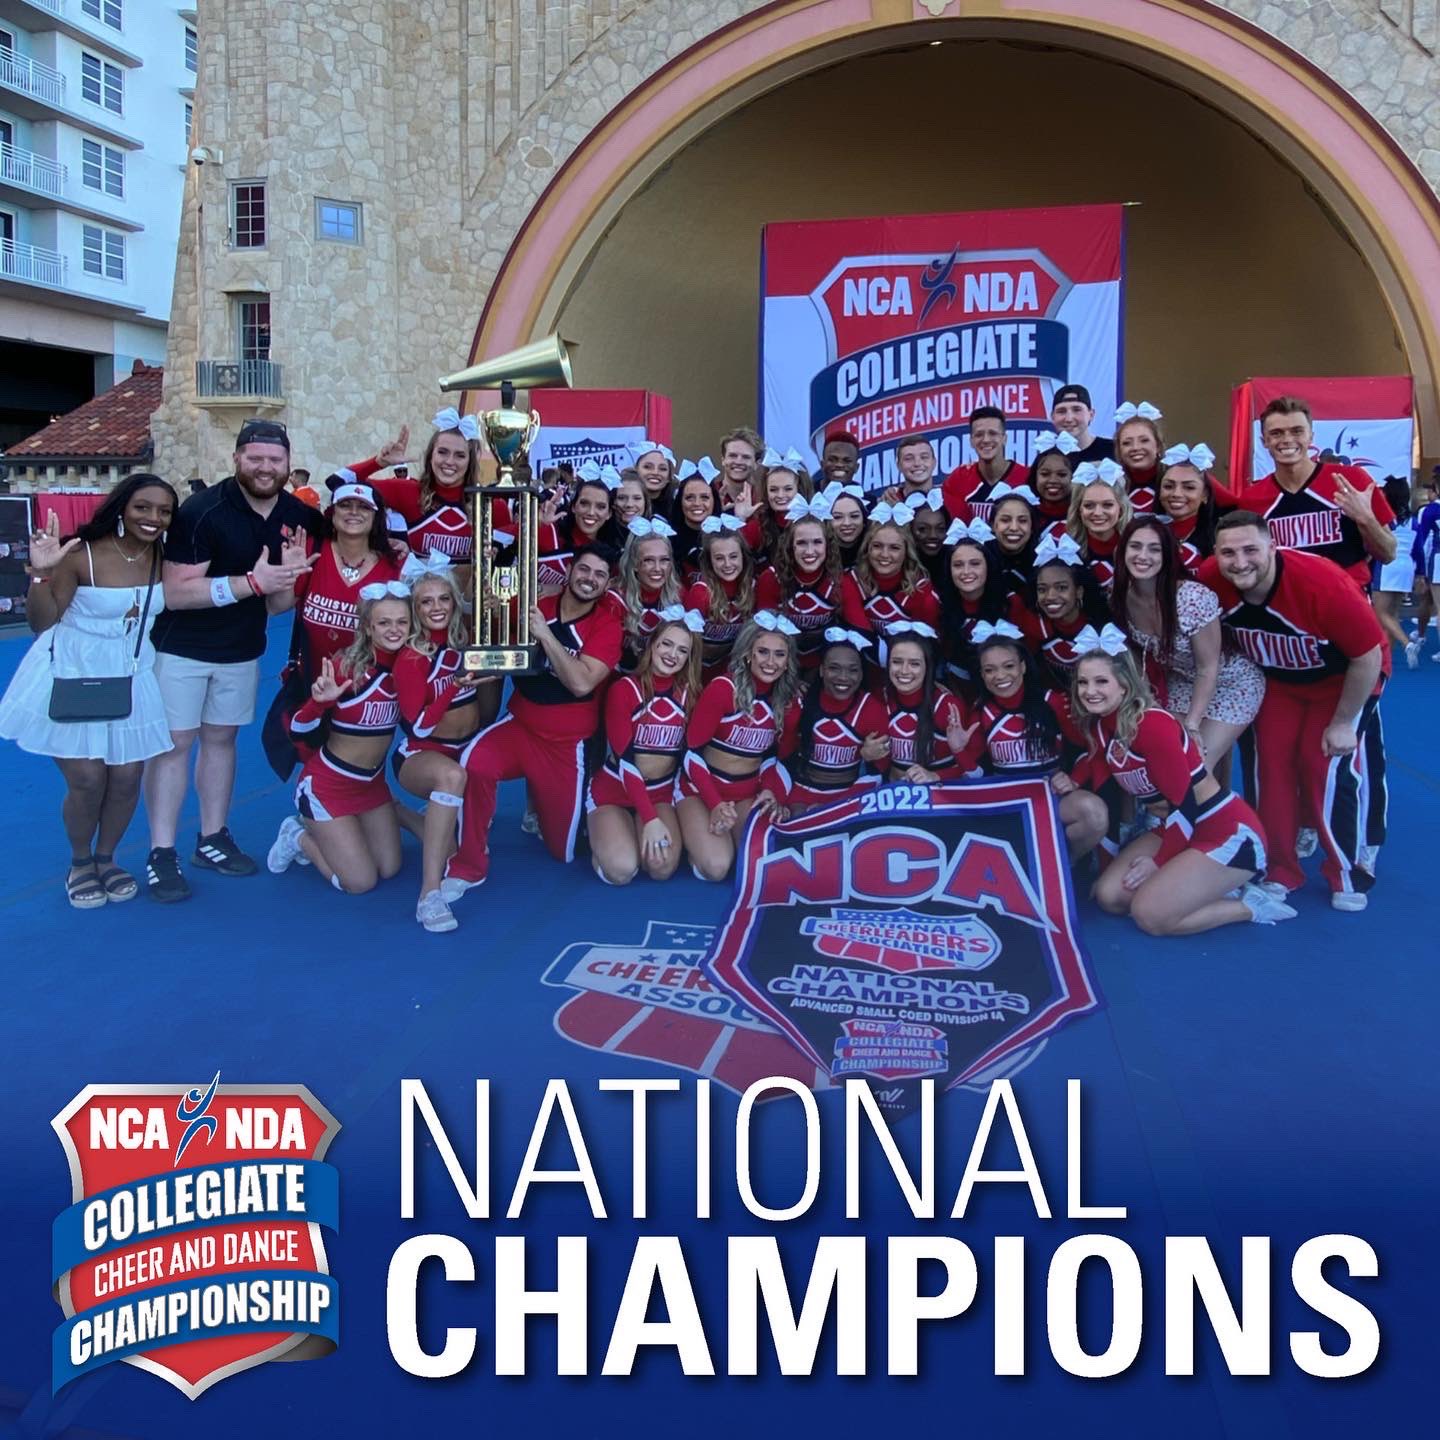 NCA on Twitter: "Congratulations to National Champions, of Louisville! 📣 #theworkisworthit https://t.co/V6Cd8ScCbd" Twitter